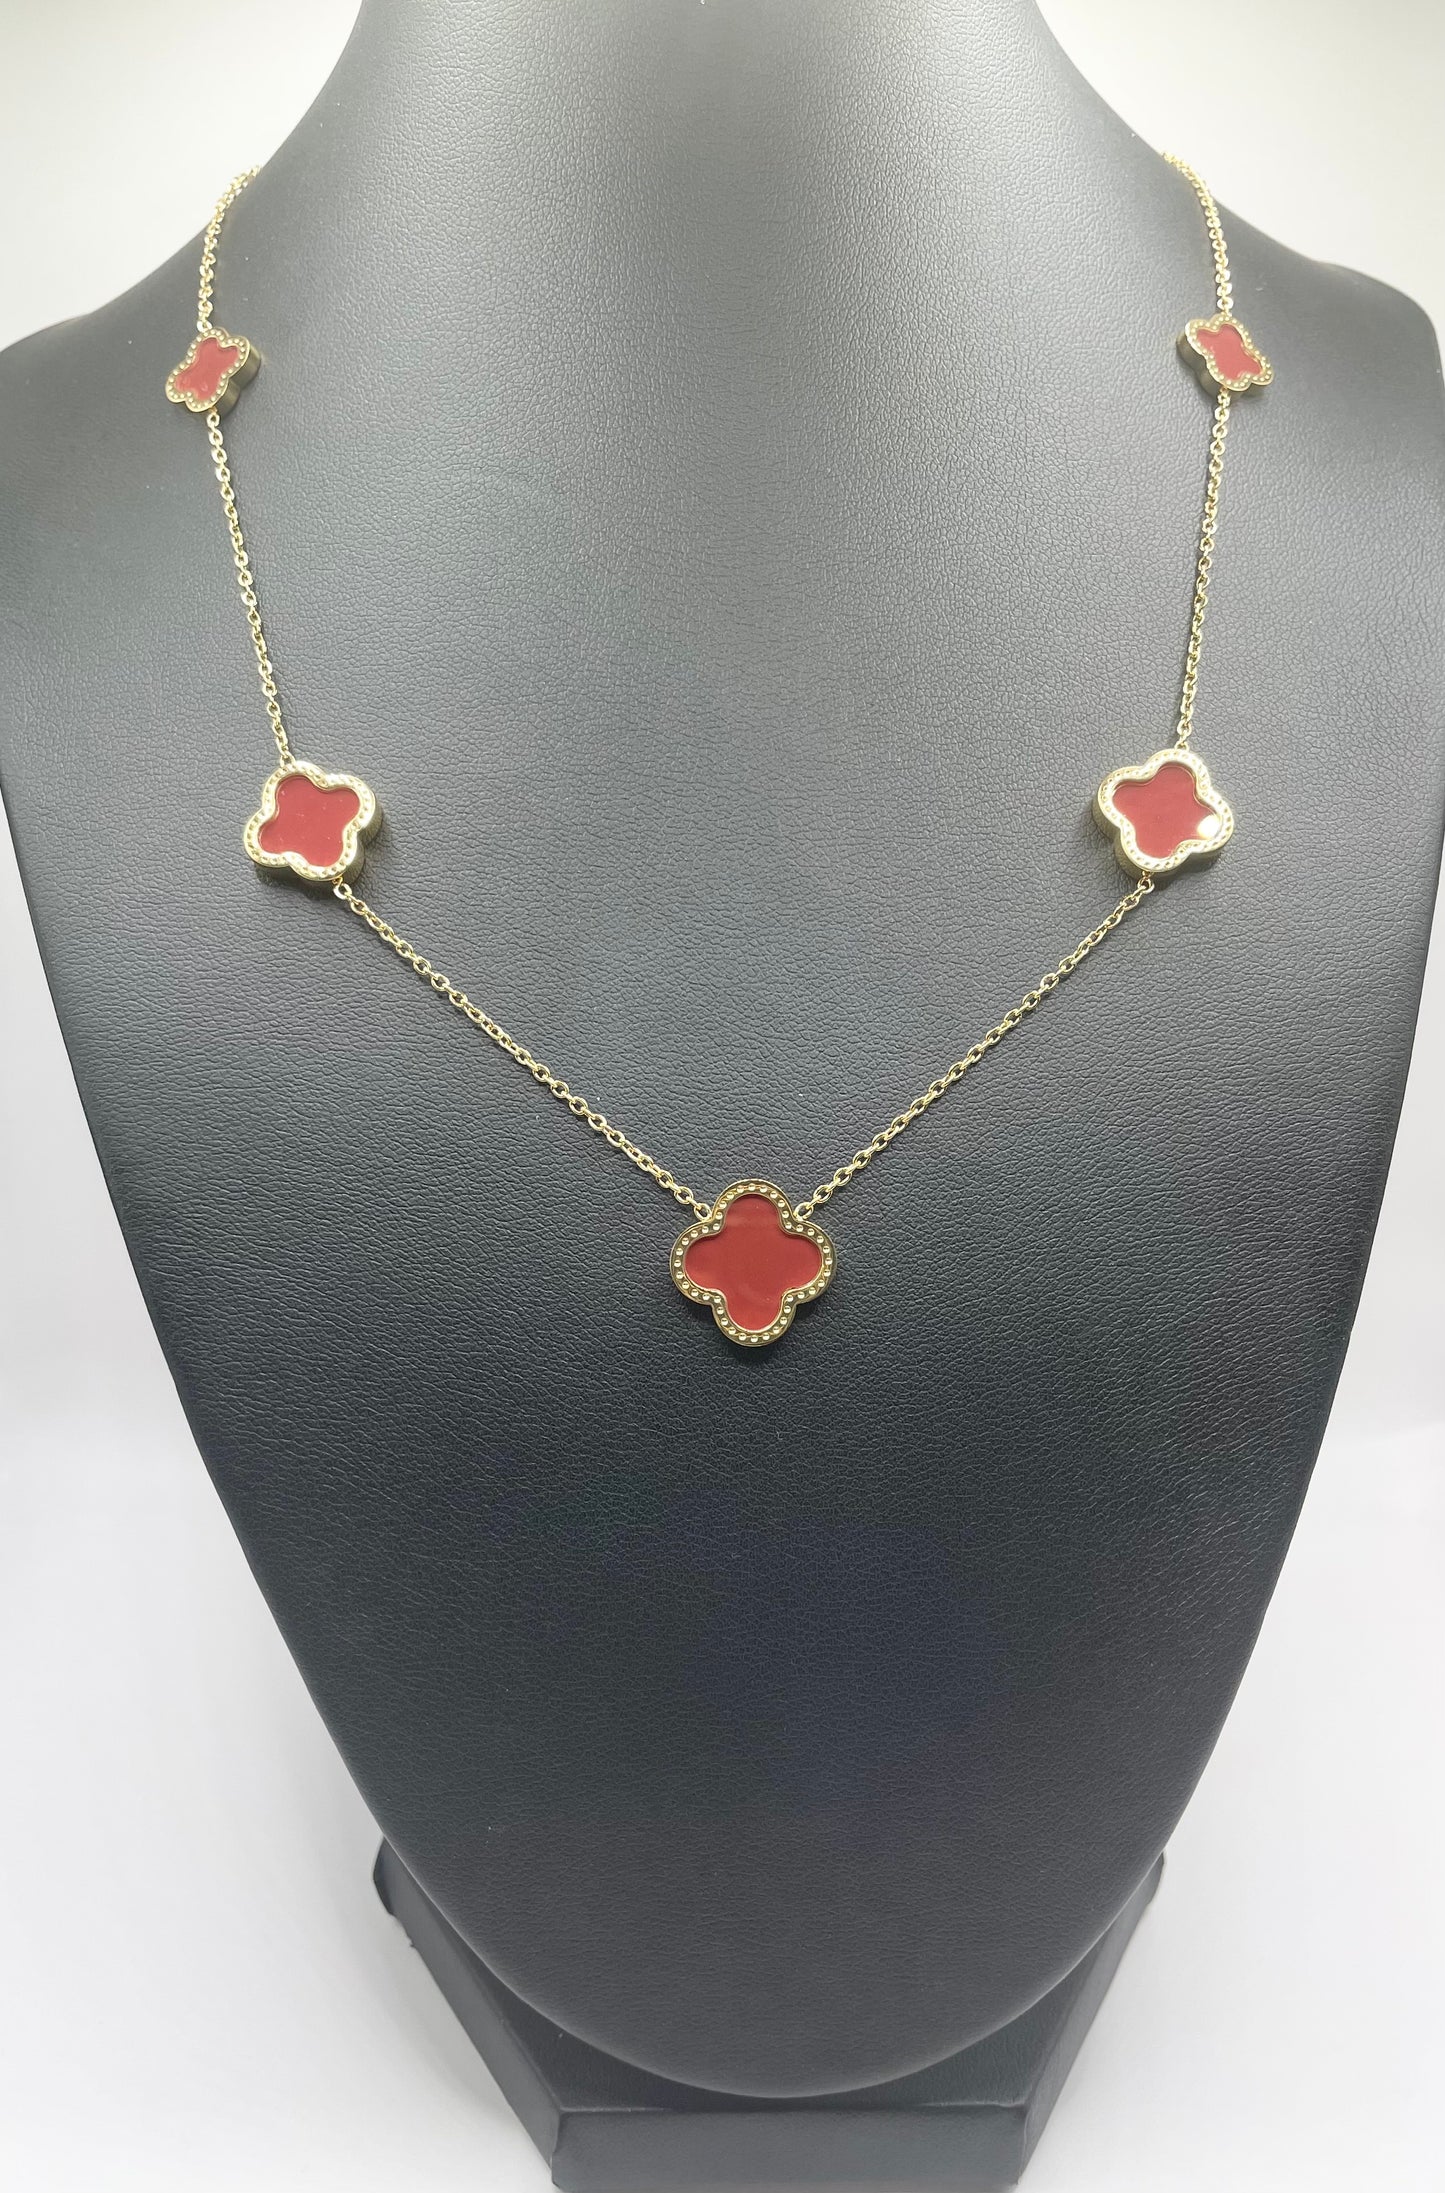 5 Motif High Quality Four Leaf Clover 18K Gold Plated Sterling Silver Necklace